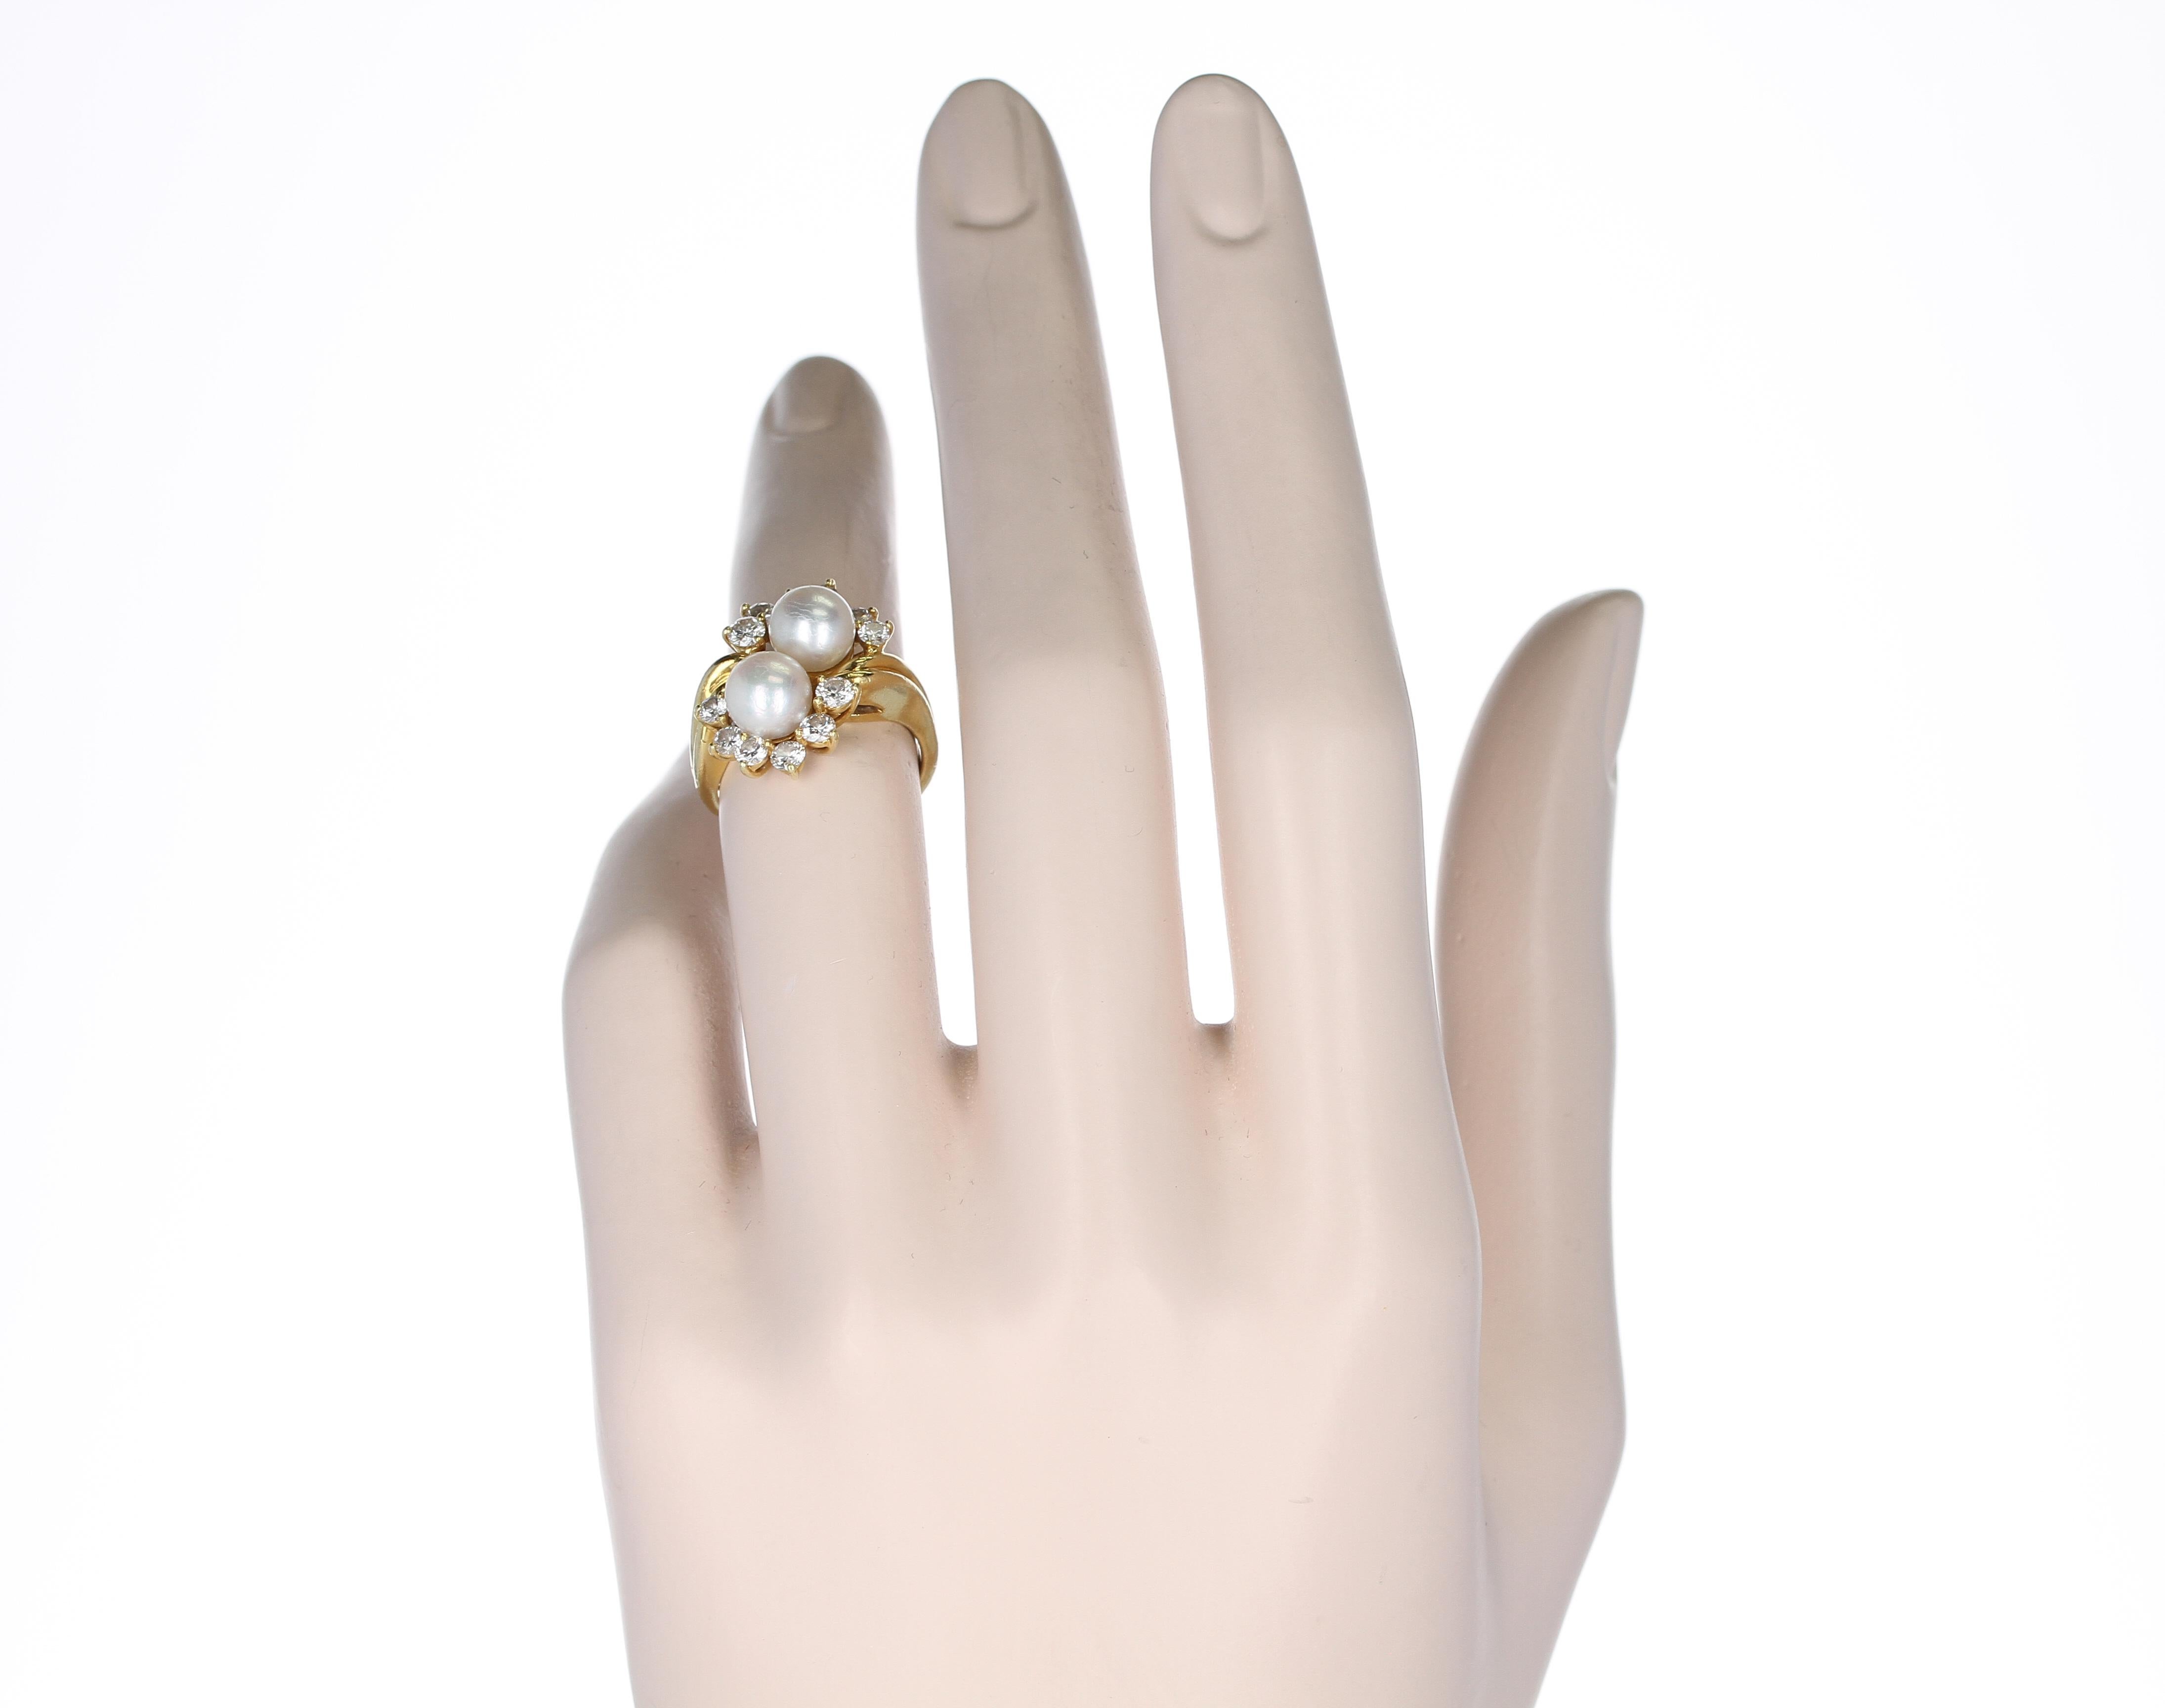 A Tiffany & Co. Double Pearl Ring with 6 Round Diamonds each, made in 18 Karat Yellow Gold. 
Ring Size US 6.50. Total Weight: 9.38 grams.